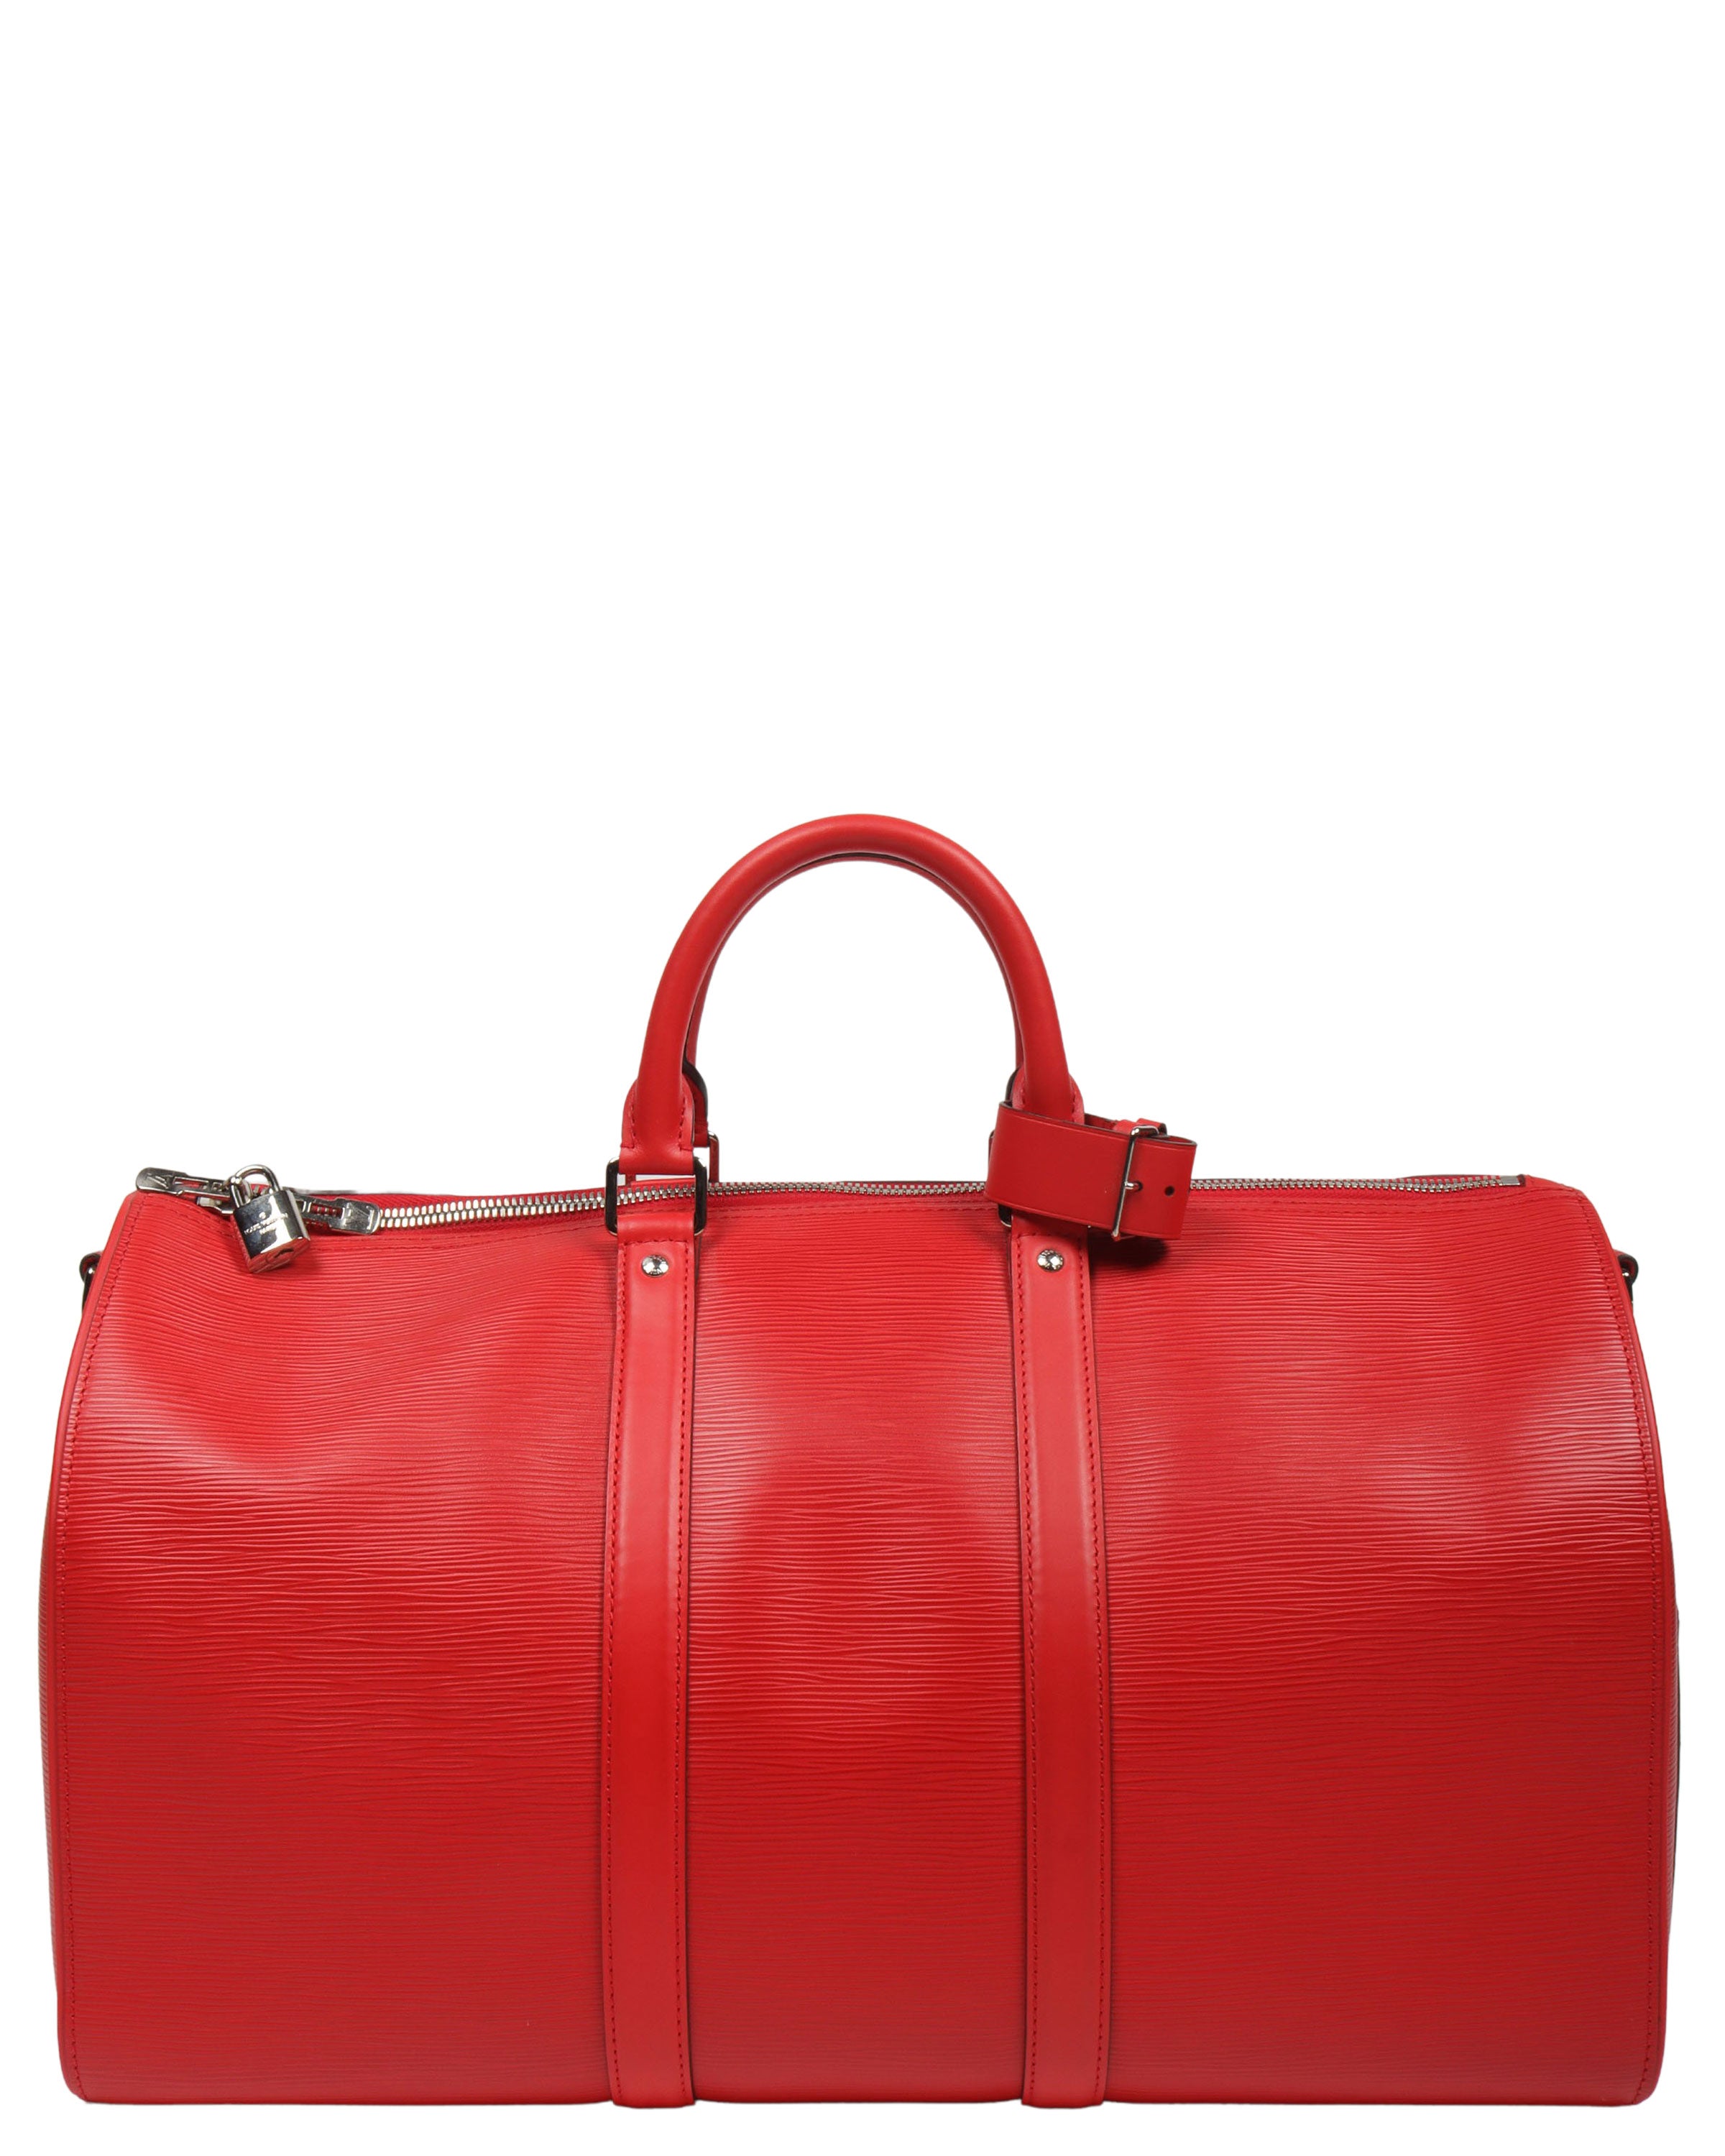 Louis Vuitton Keepall Bandouliere 45 Supreme Red Epi Leather Weekend Travel  Bag